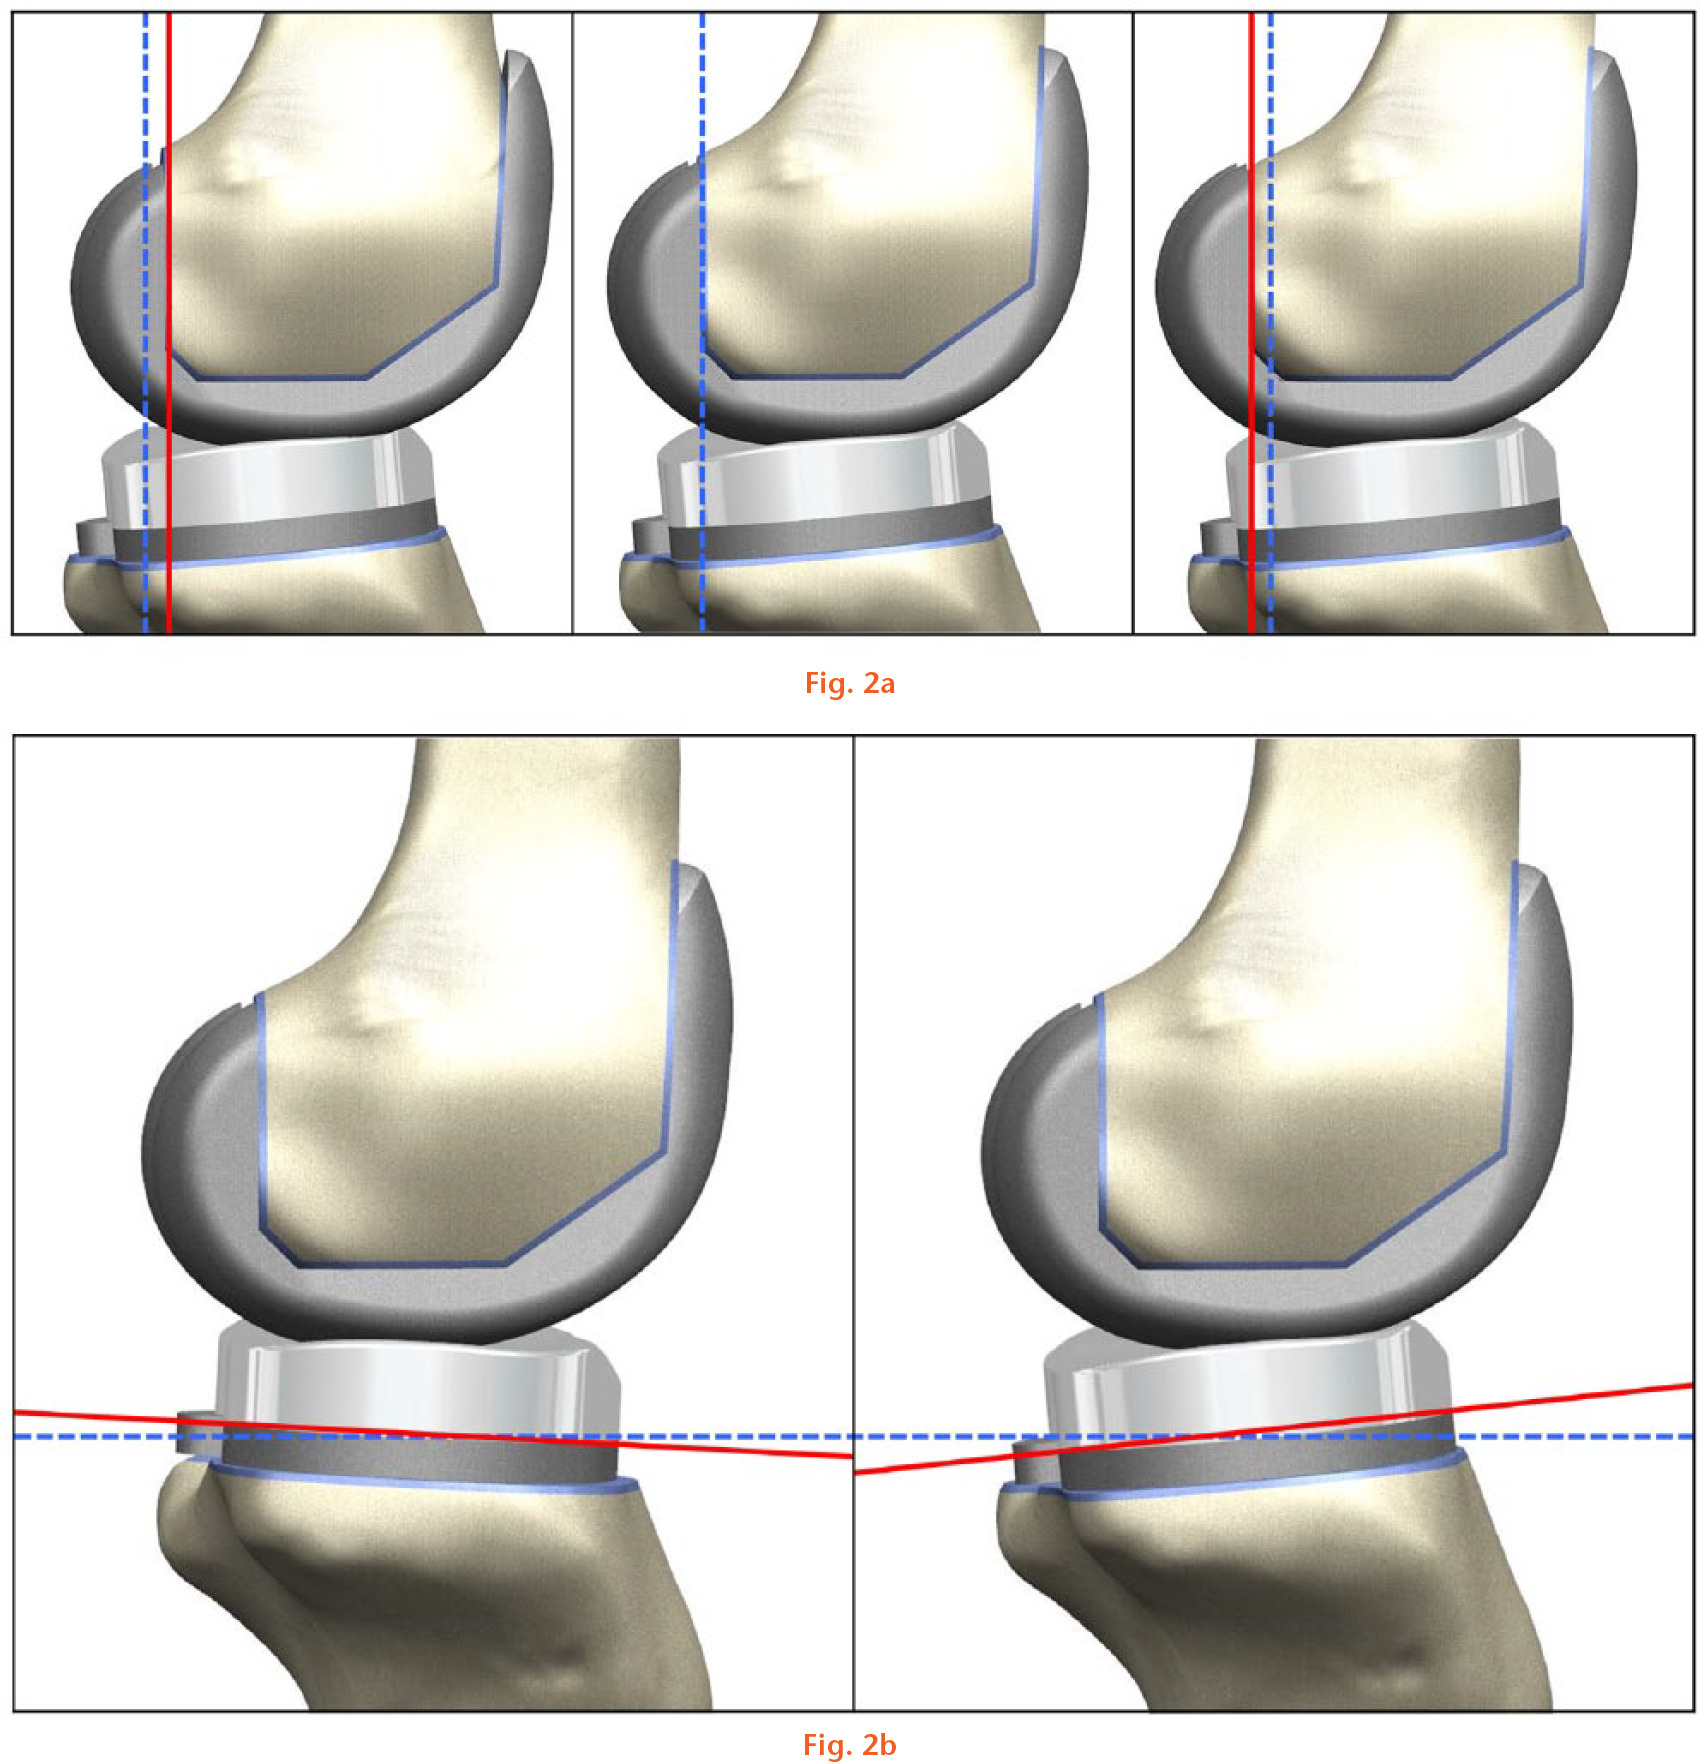  
            Schematic of the knee models with respect to change in a) posterior condylar offset (left) at anterior 3 mm (- 3 mm), (middle) 0 mm and (right) posterior 3 mm (+ 3 mm), and b) posterior tibial slope at - 3° and + 6°.
          